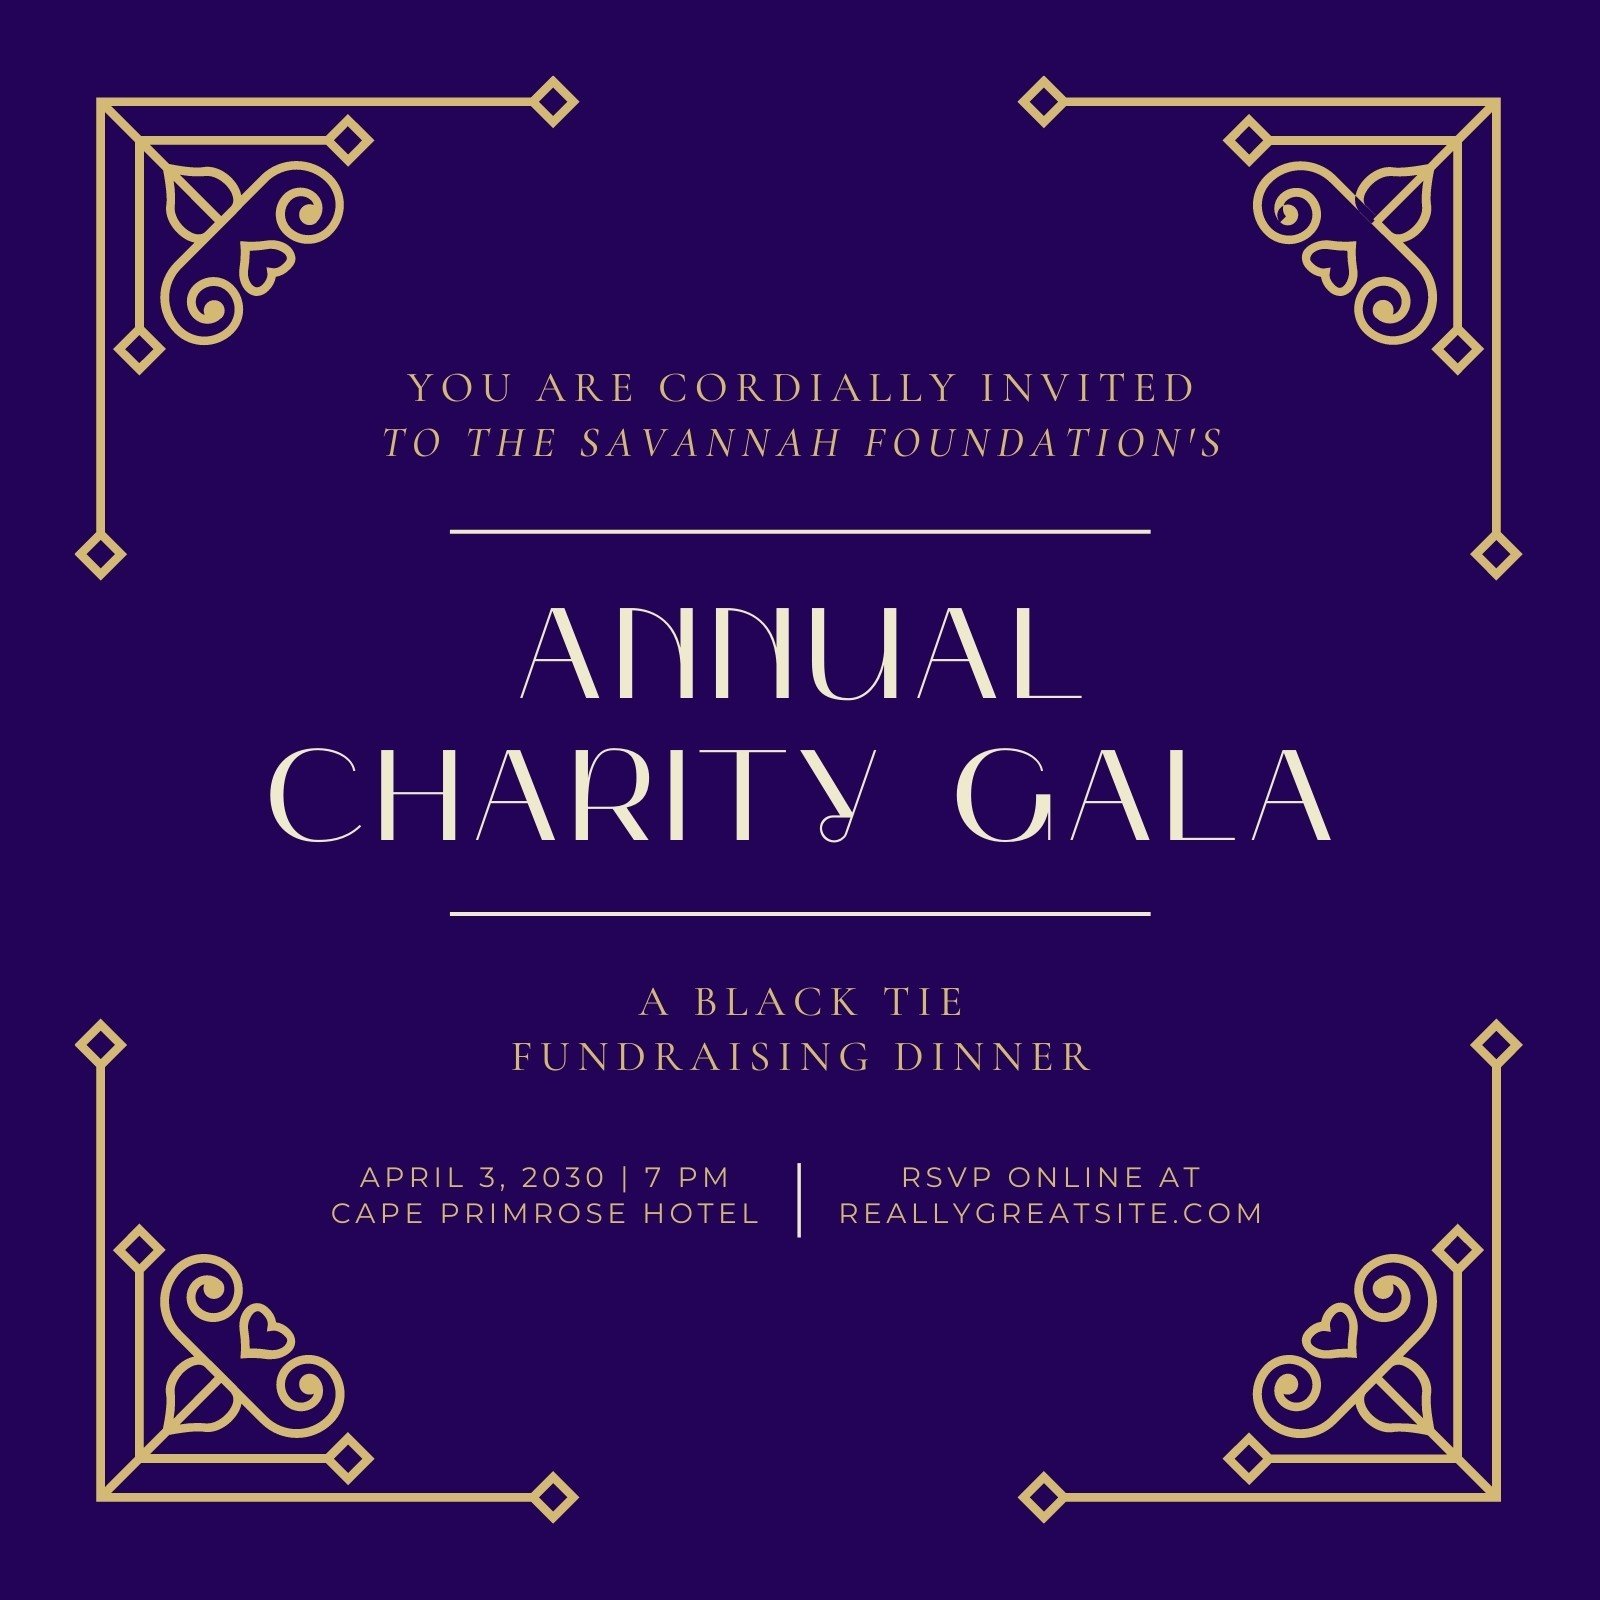 Customize 22+ Gala Invitations Templates Online - Canva With Regard To Free Dinner Invitation Templates For Word